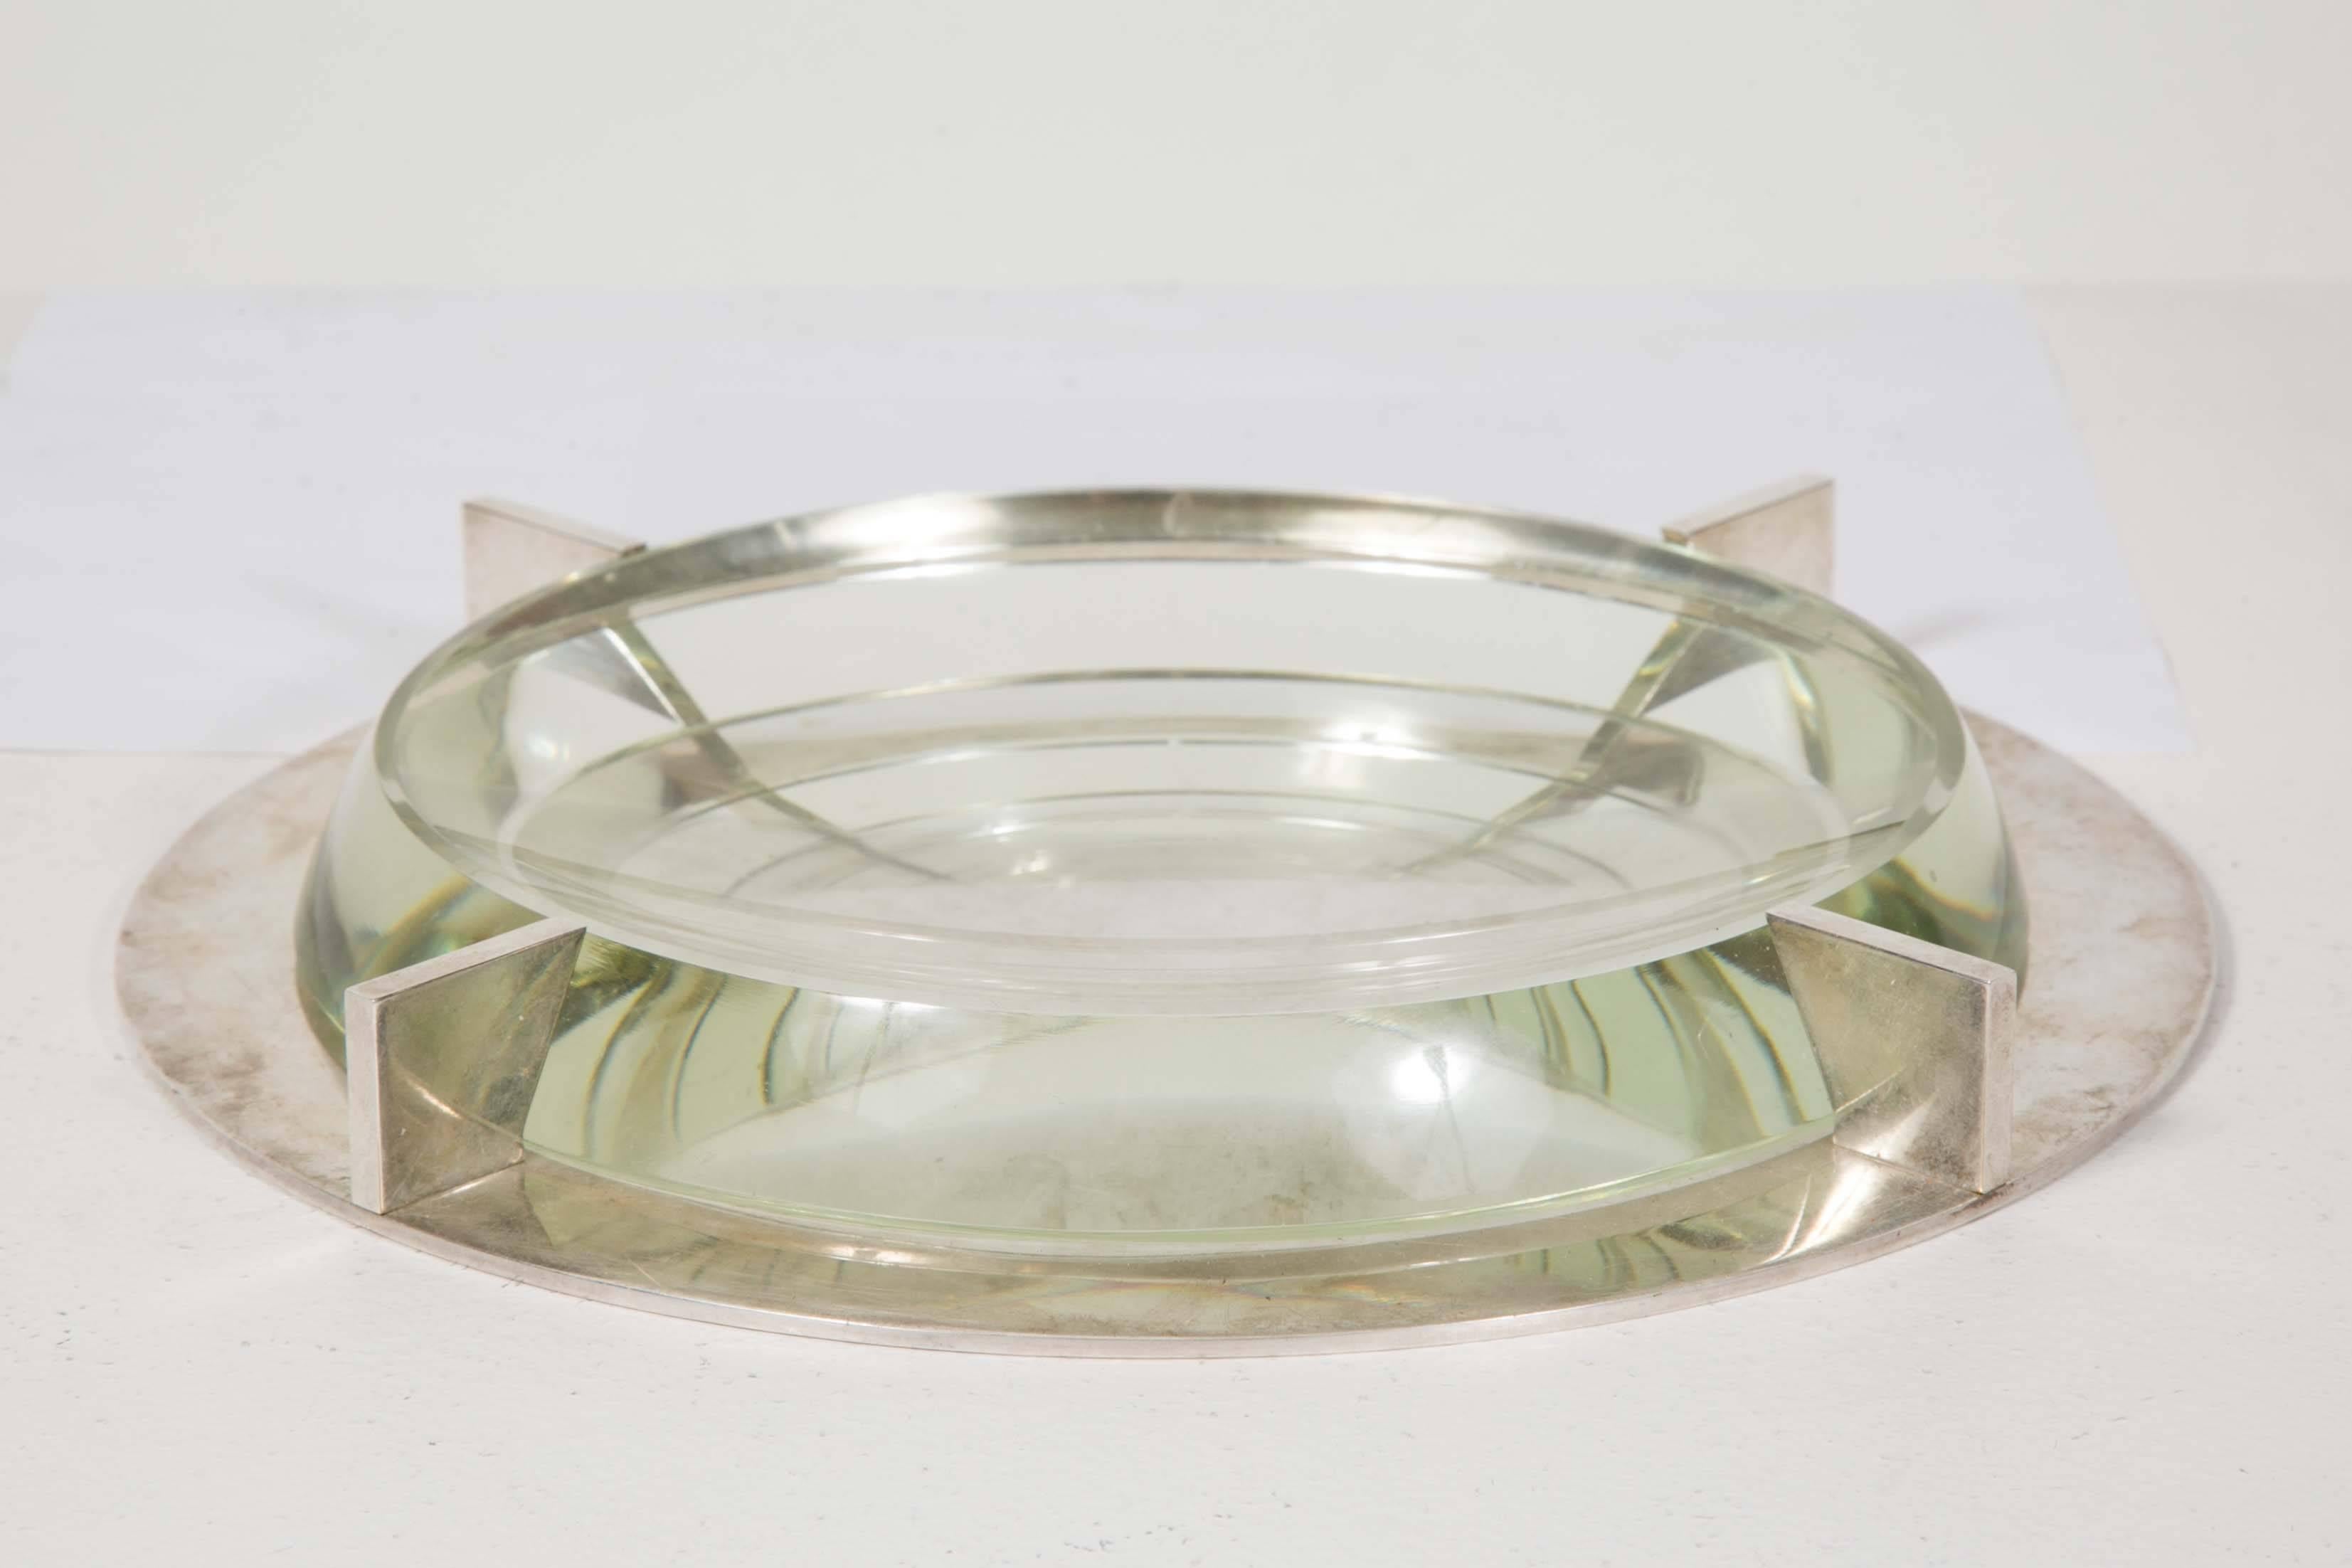 Large modernist pin tray (vide poche) by Jean Boris Lacroix (1902-1984). Thick glass slab and nickel-plated bronze. Boris Lacroix stamp,
circa 1930.
Very good condition.

Boris Lacroix was a famous designer in the 1920s-1930s who designed